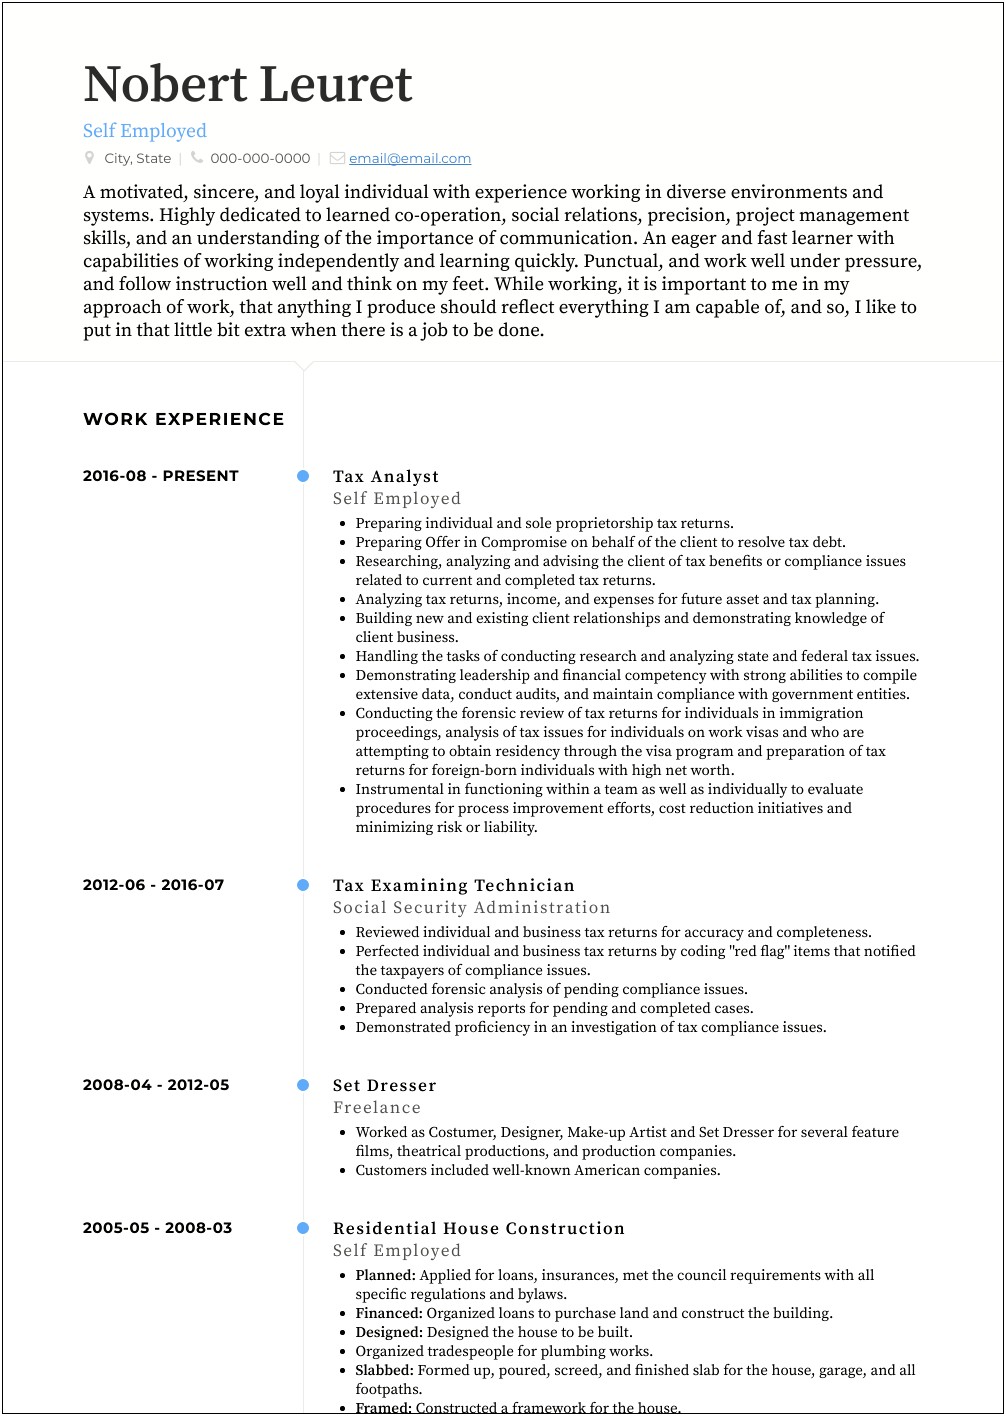 Sample Resumes For Self Supporters